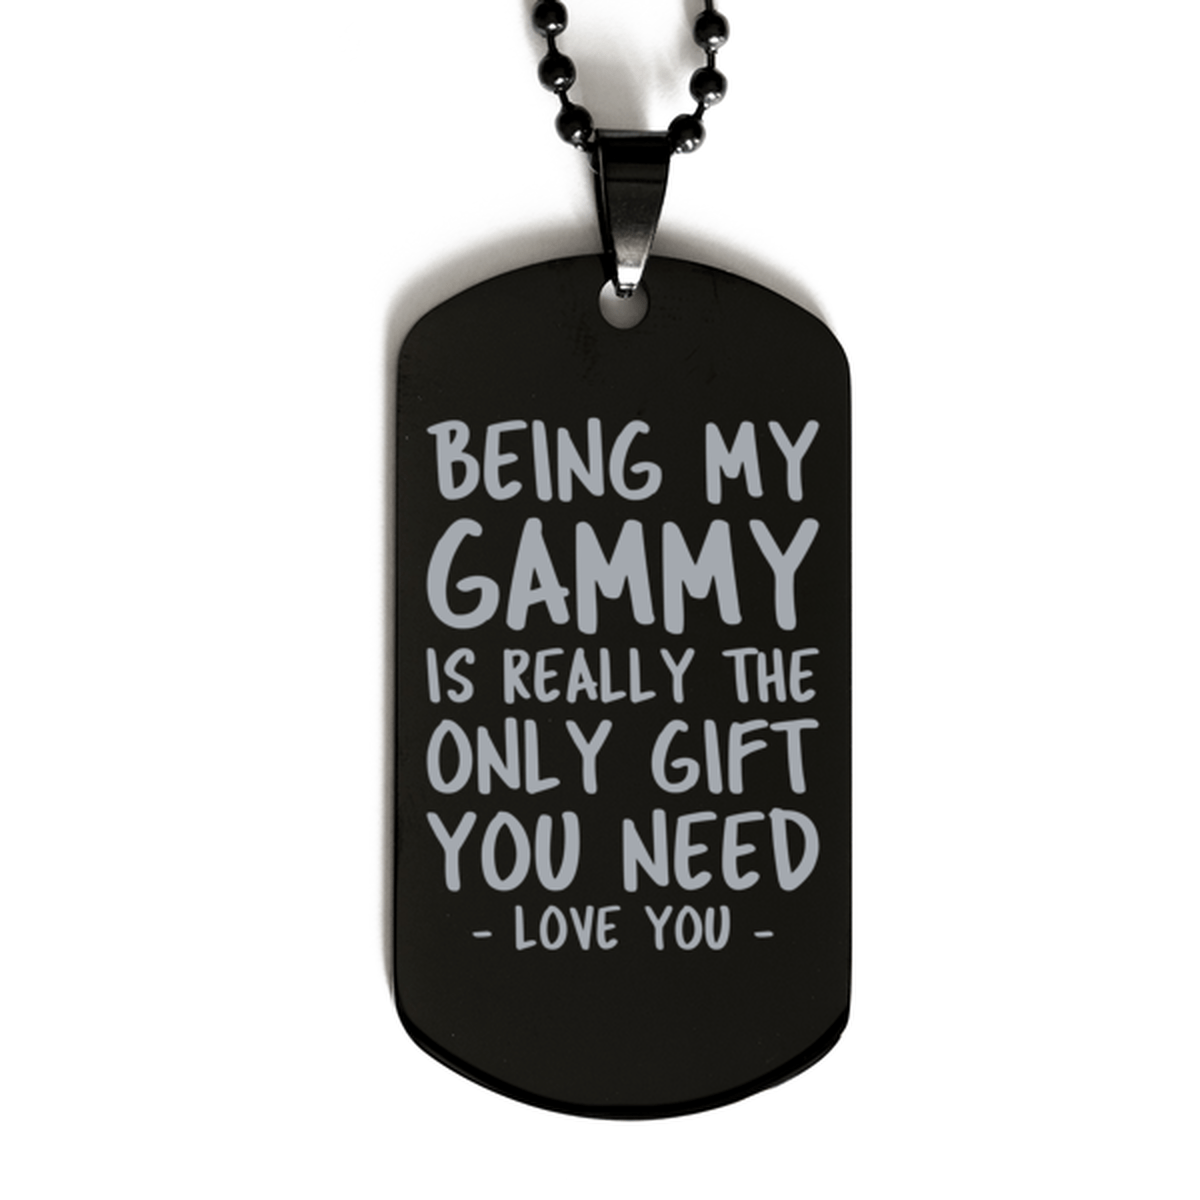 Funny Gammy Black Dog Tag Necklace, Being My Gammy Is Really the Only Gift You Need, Best Birthday Gifts for Gammy